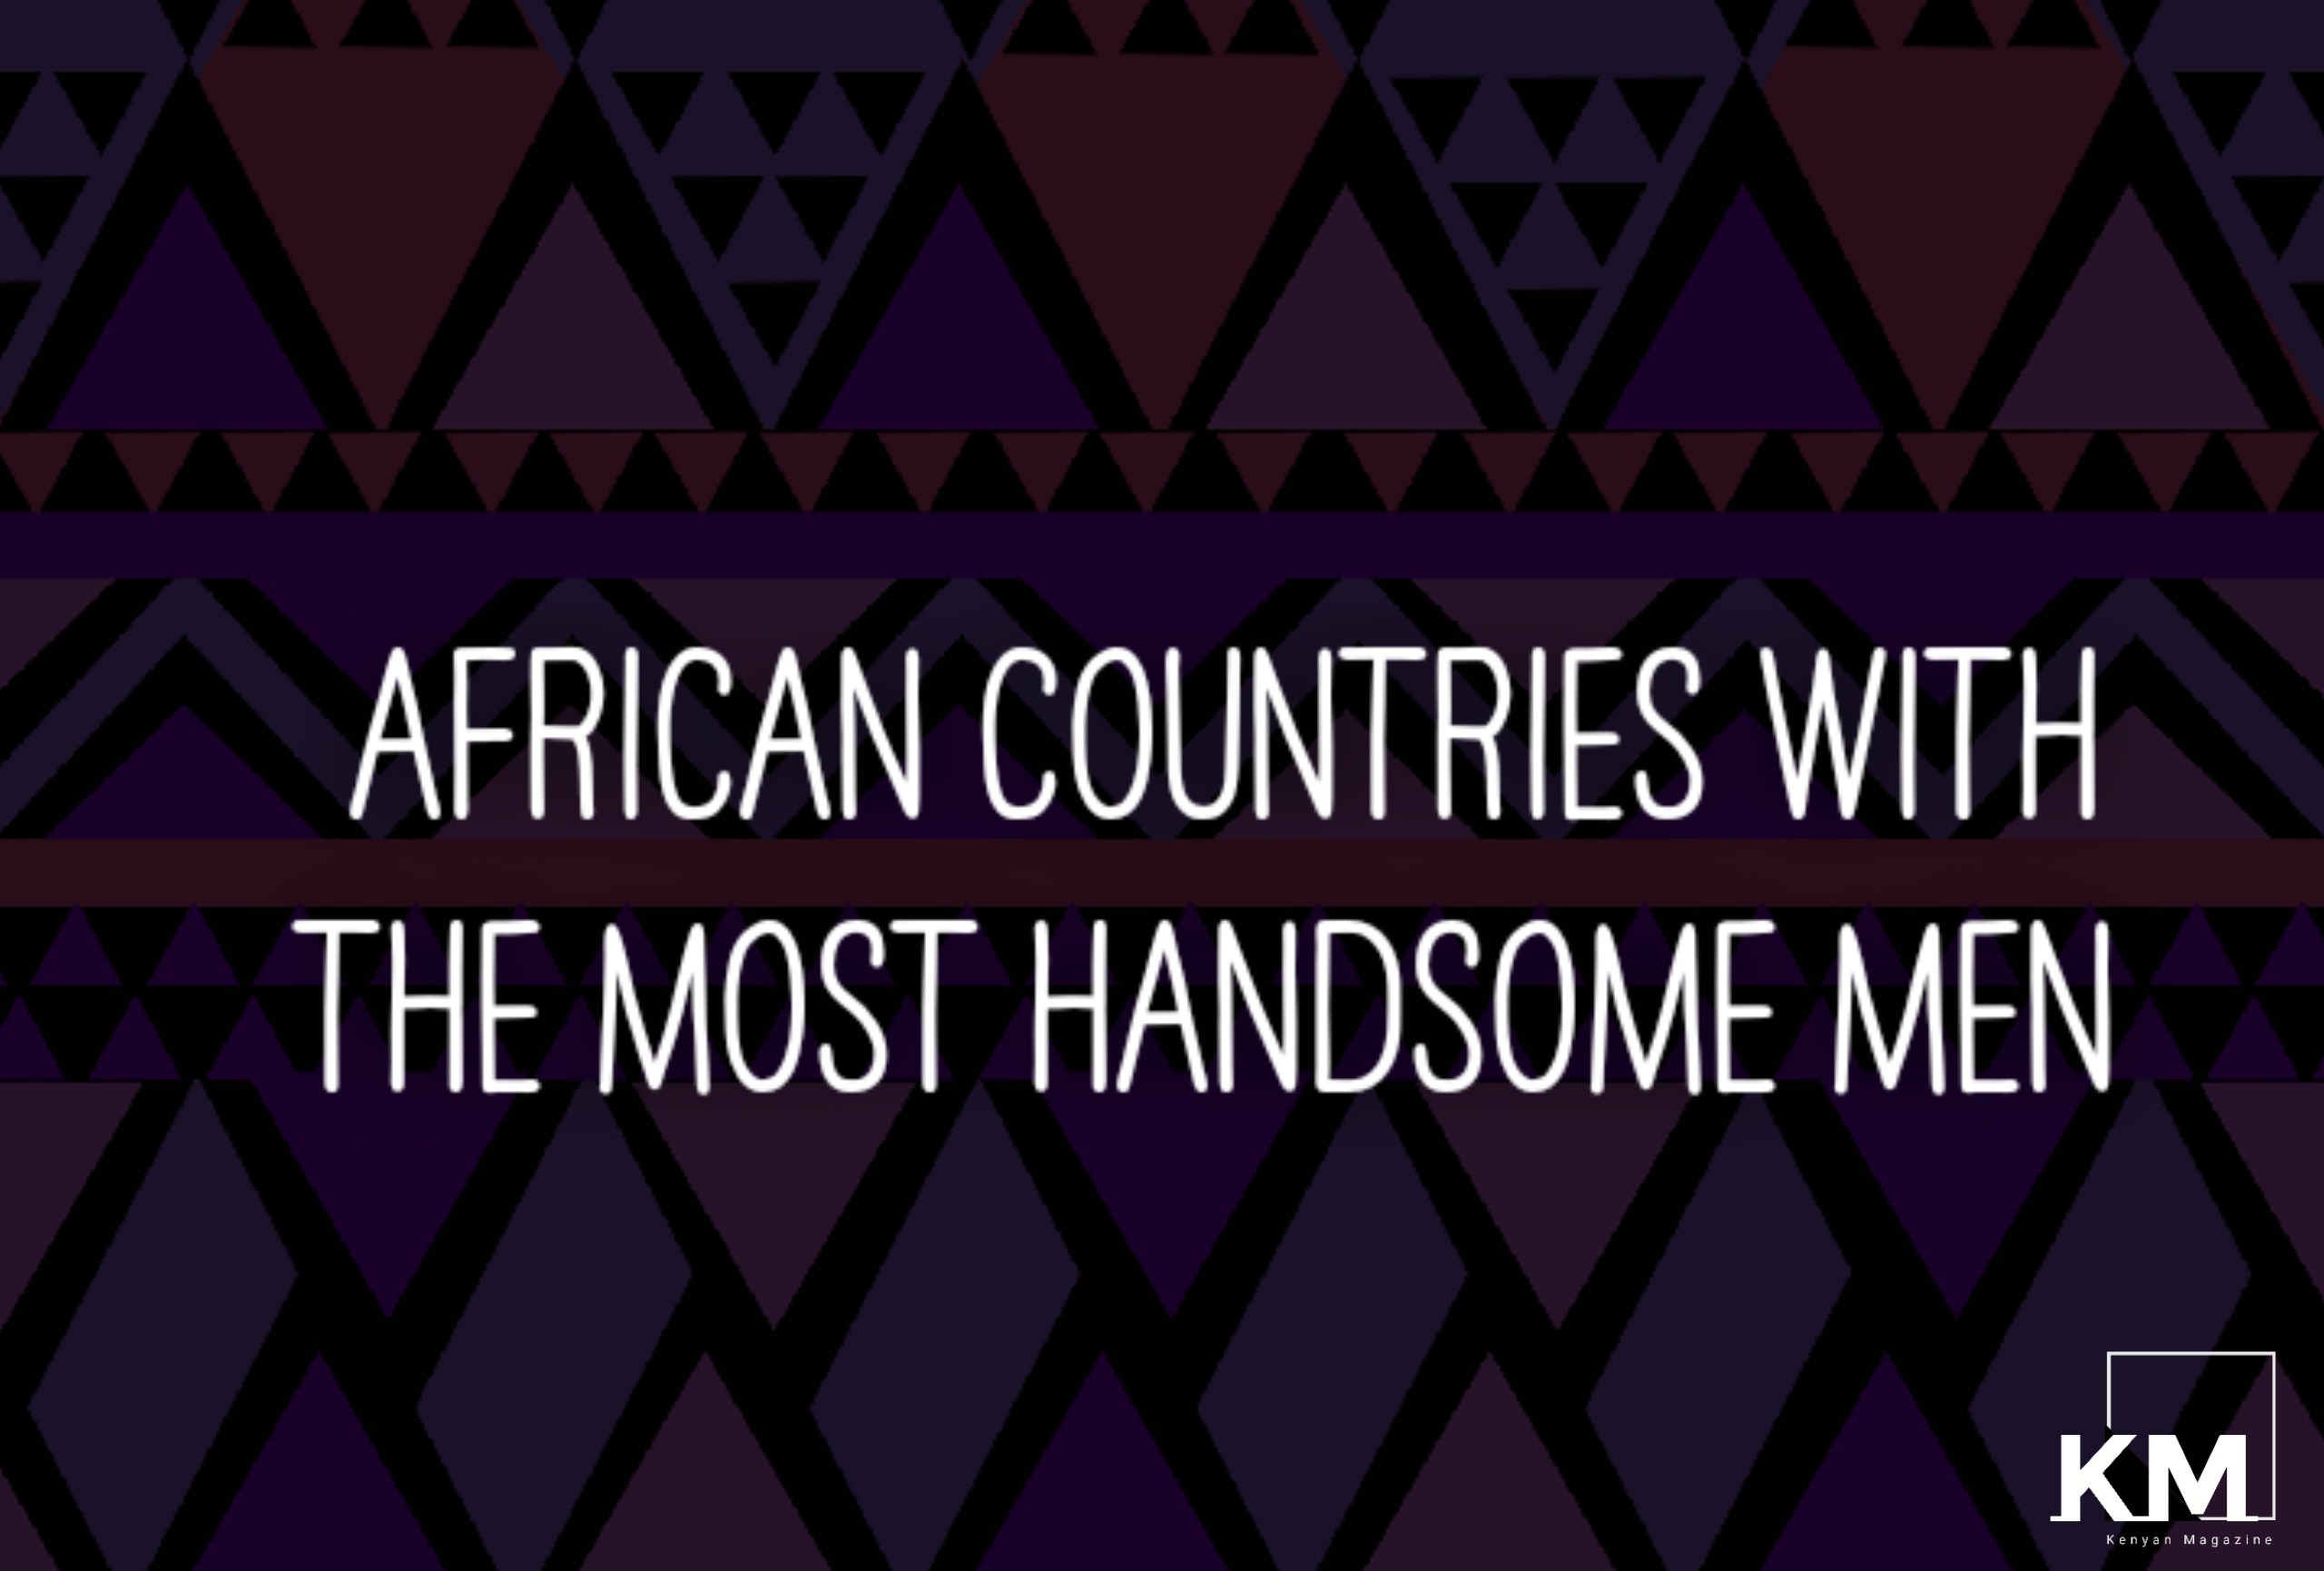 Countries With The Most Handsome Men In Africa